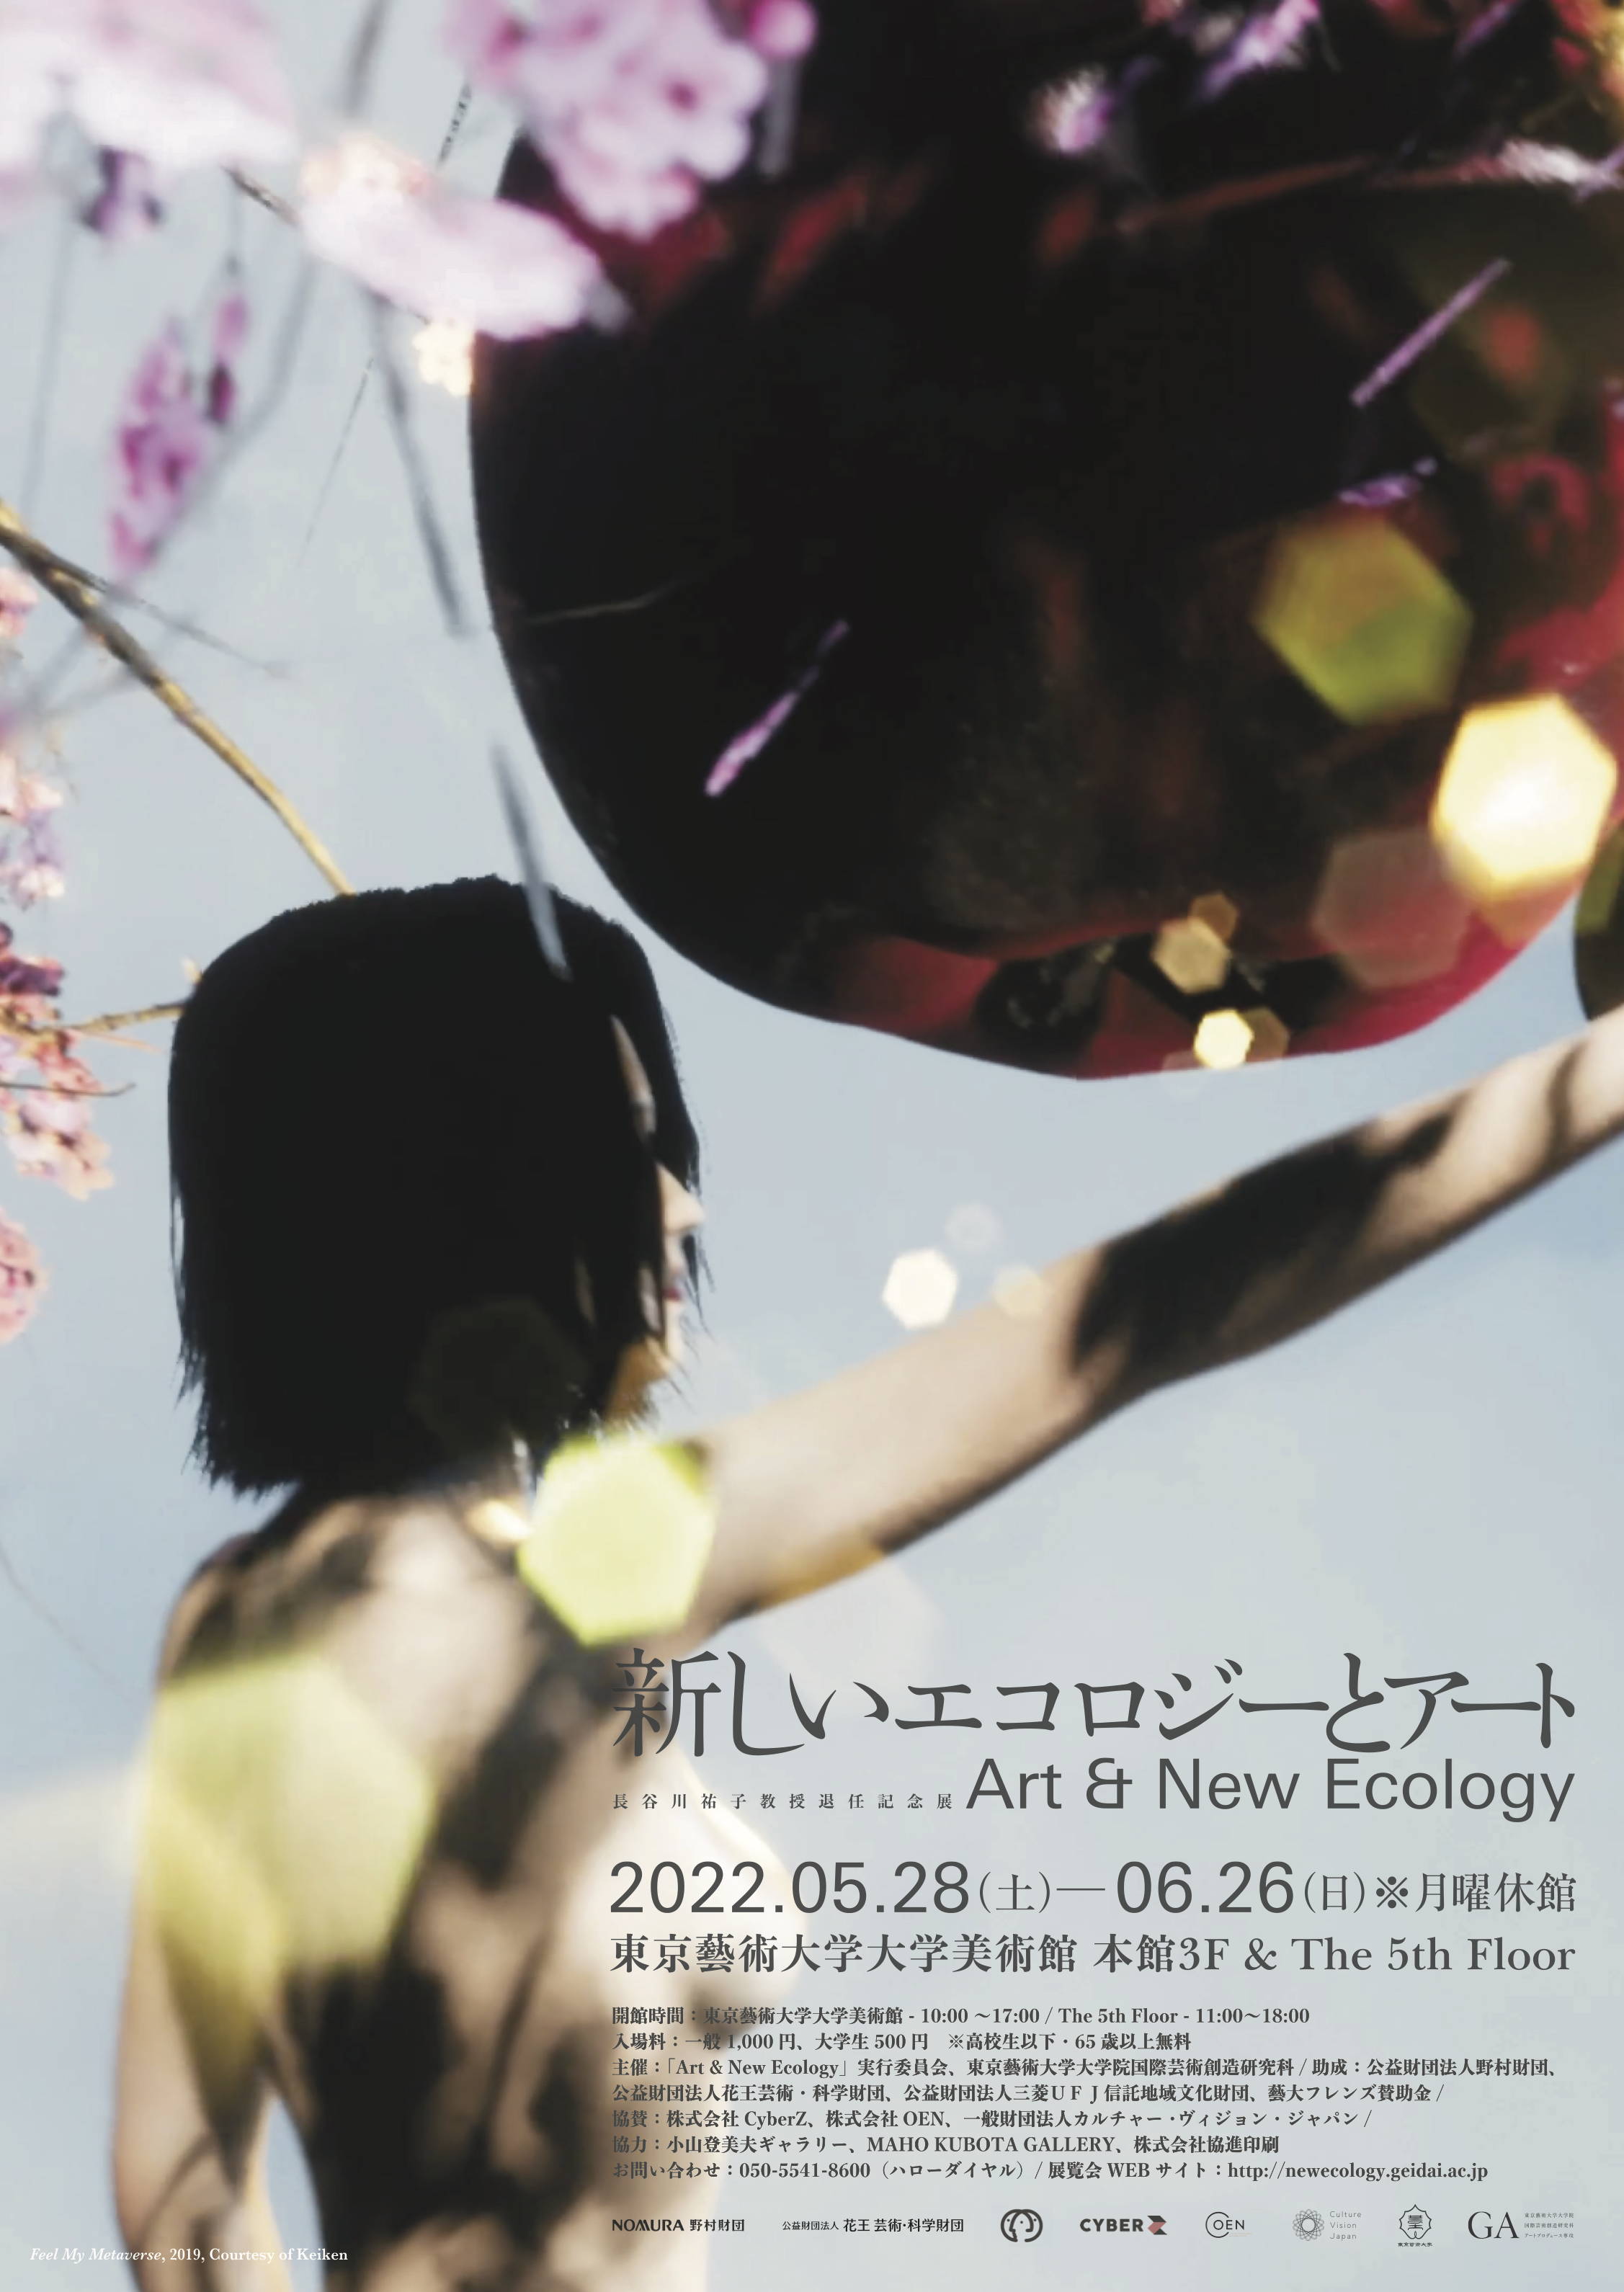 “Art And New Ecology” Exhibition International Symposium: Art, Ecology, And Our Future